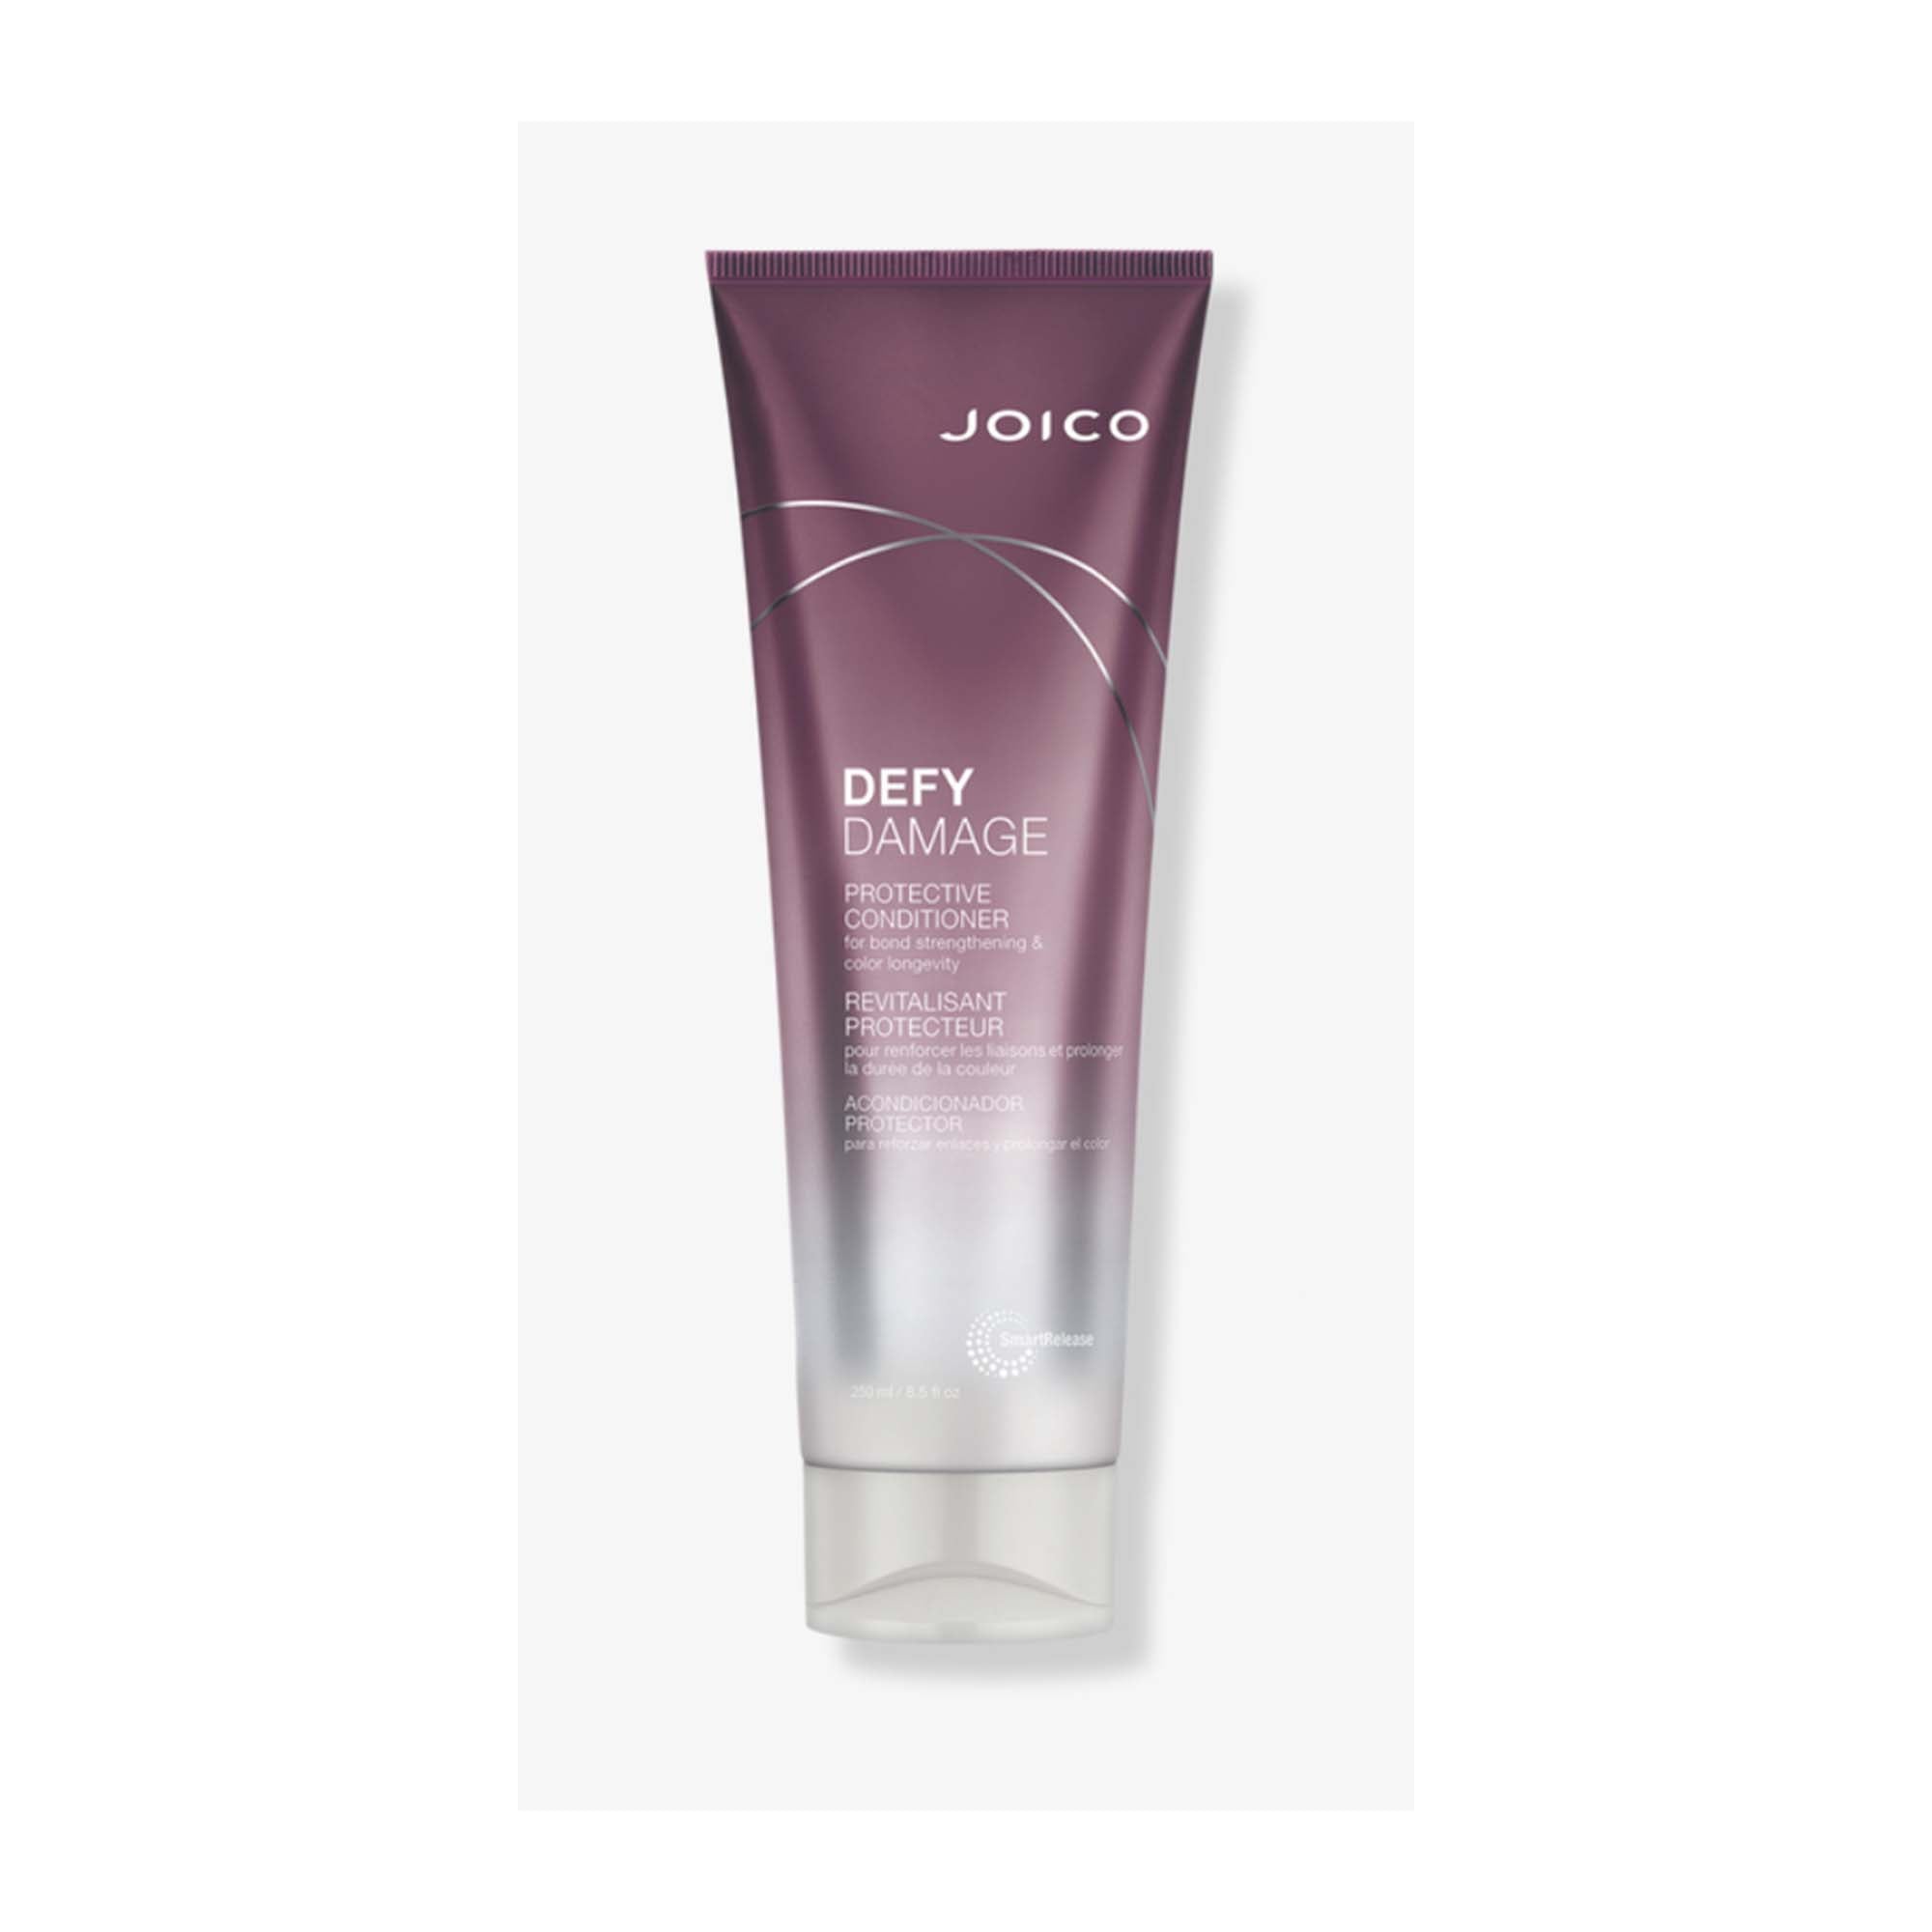 Joico Defy Damage Protective Condiitioner